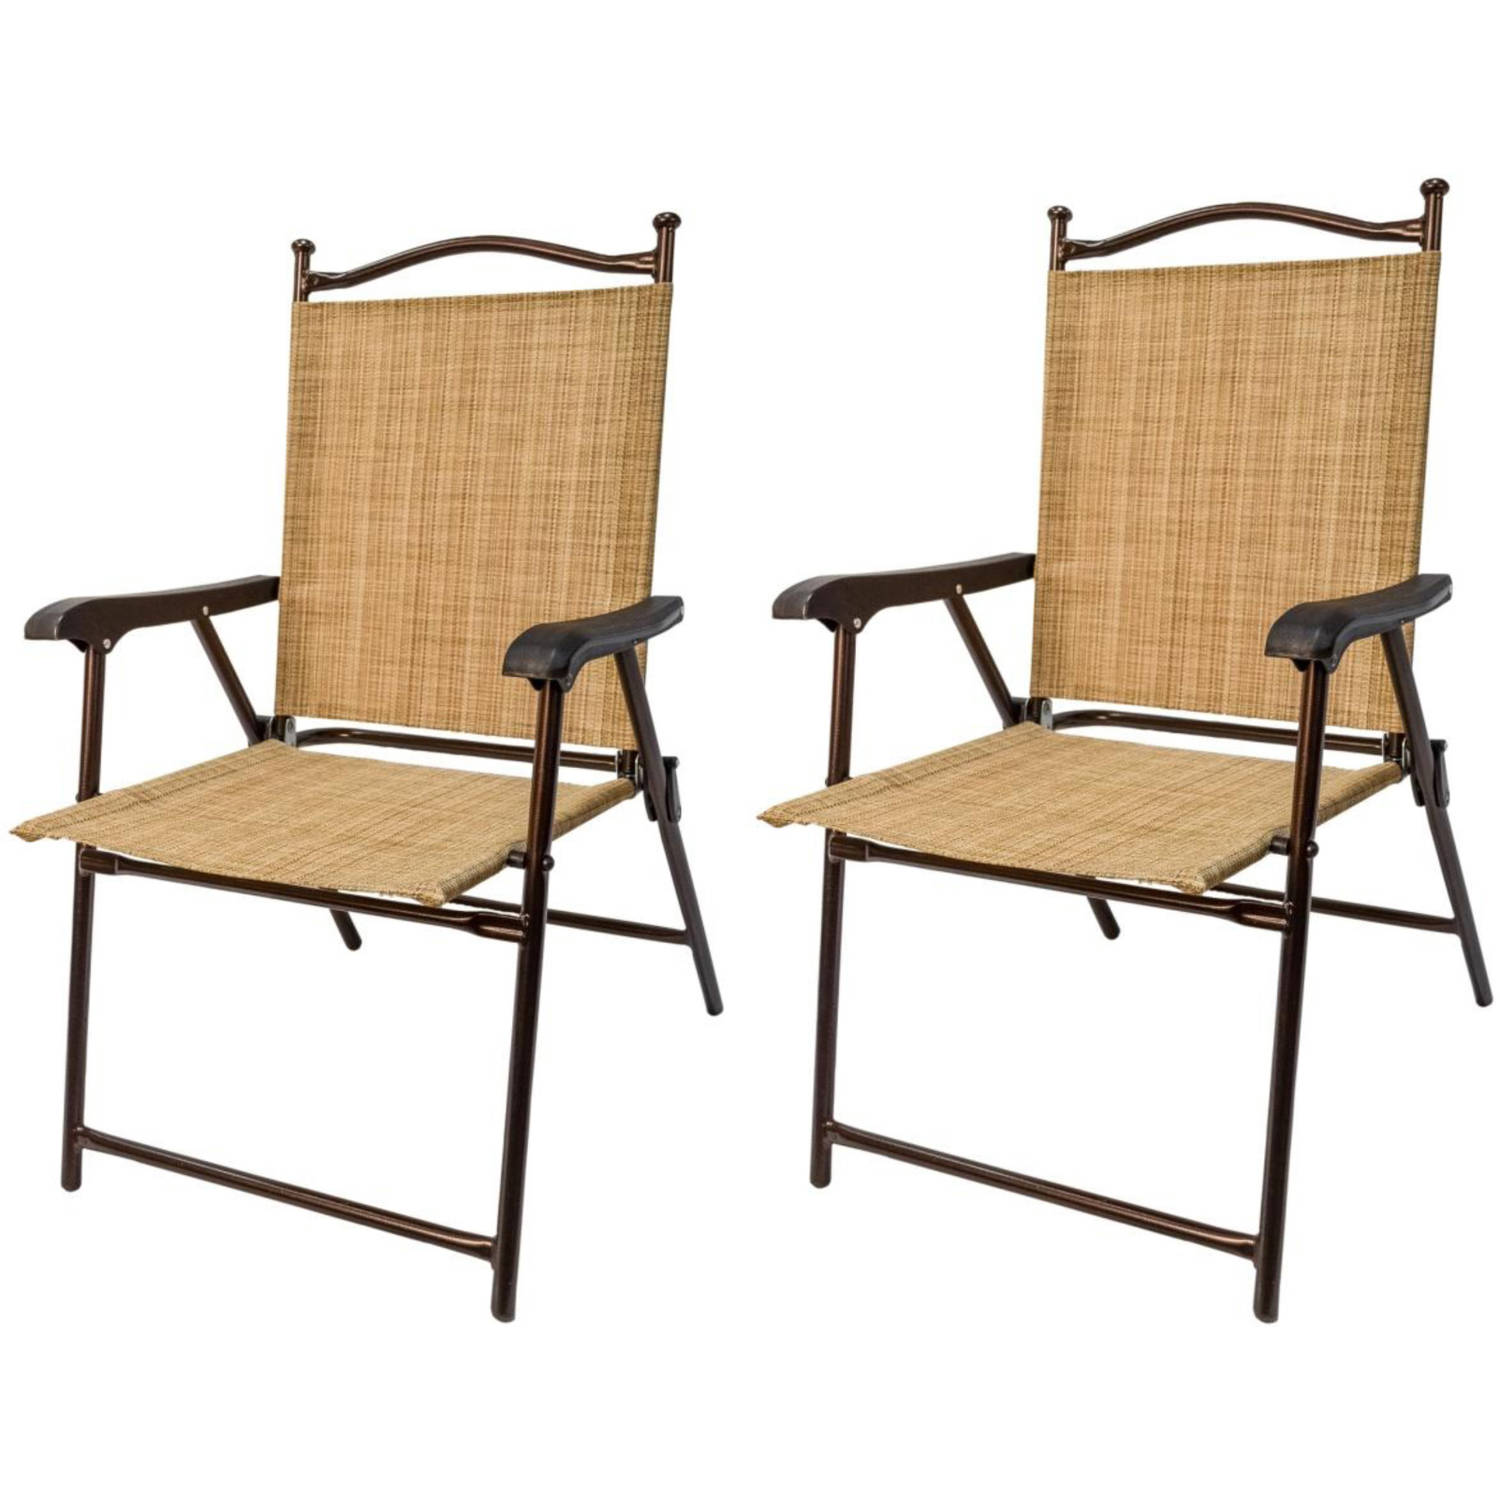 lawn chairs sling black outdoor chairs, bamboo, set of 2 BZZGHEK